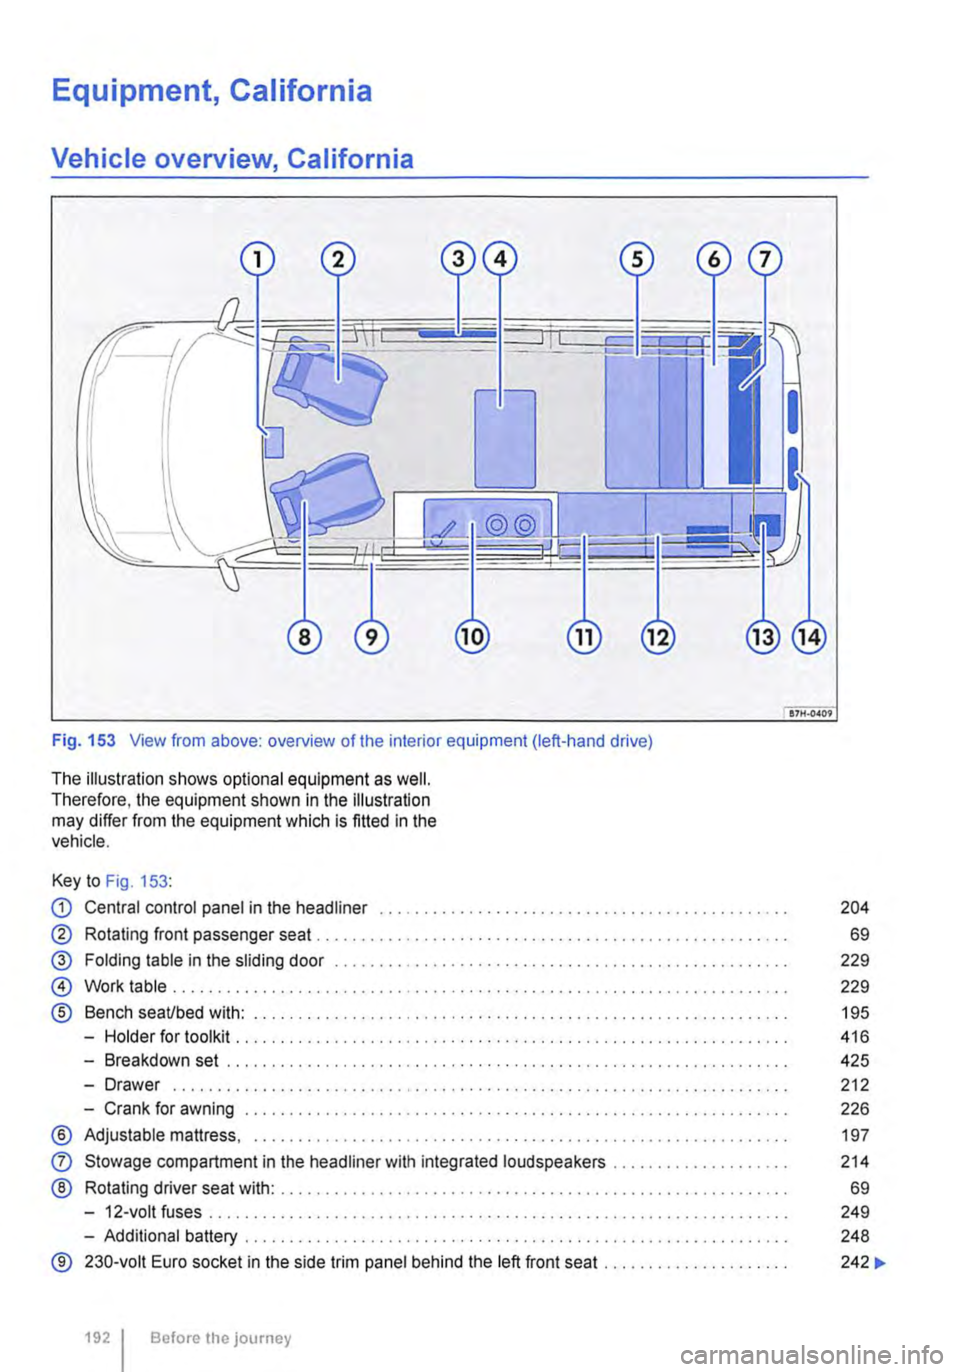 VOLKSWAGEN TRANSPORTER 2012  Owners Manual Equipment, California 
Vehicle overview, California 
 
Fig. 153 View from above: overview of the interior equipment (left-hand drive) 
The illustration shows optional equipment as well. Therefore, the